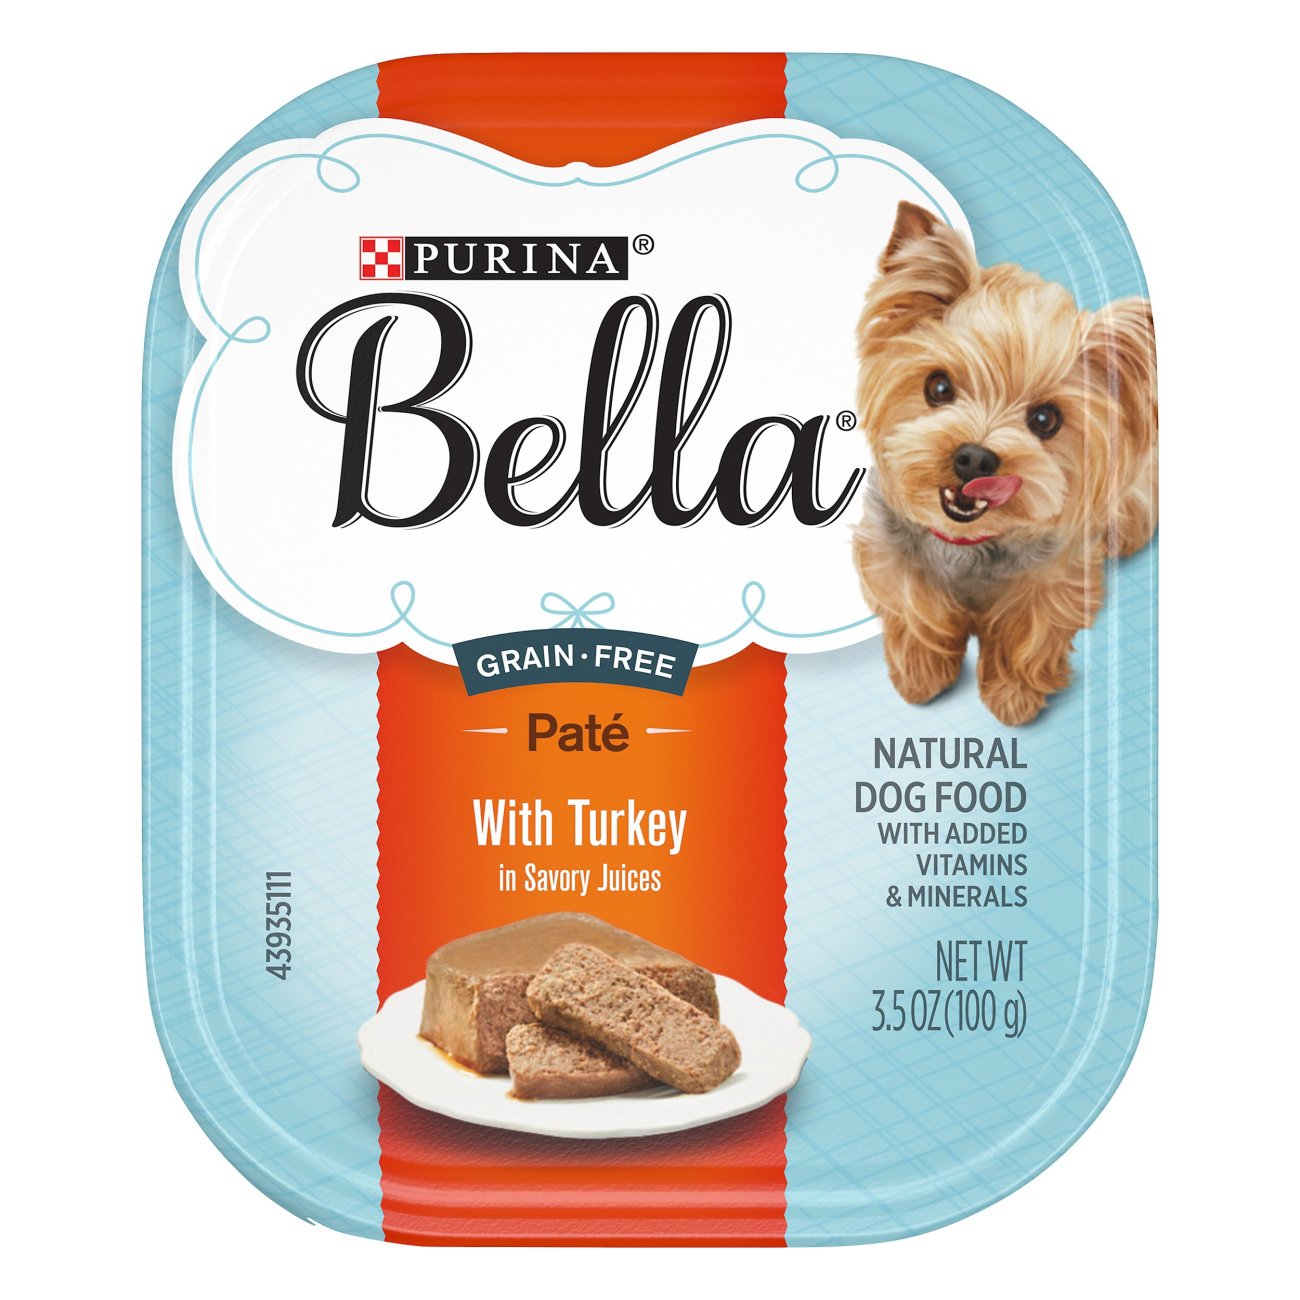 Purina Bella with Turkey in Savory Juices Wet Dog Food ...